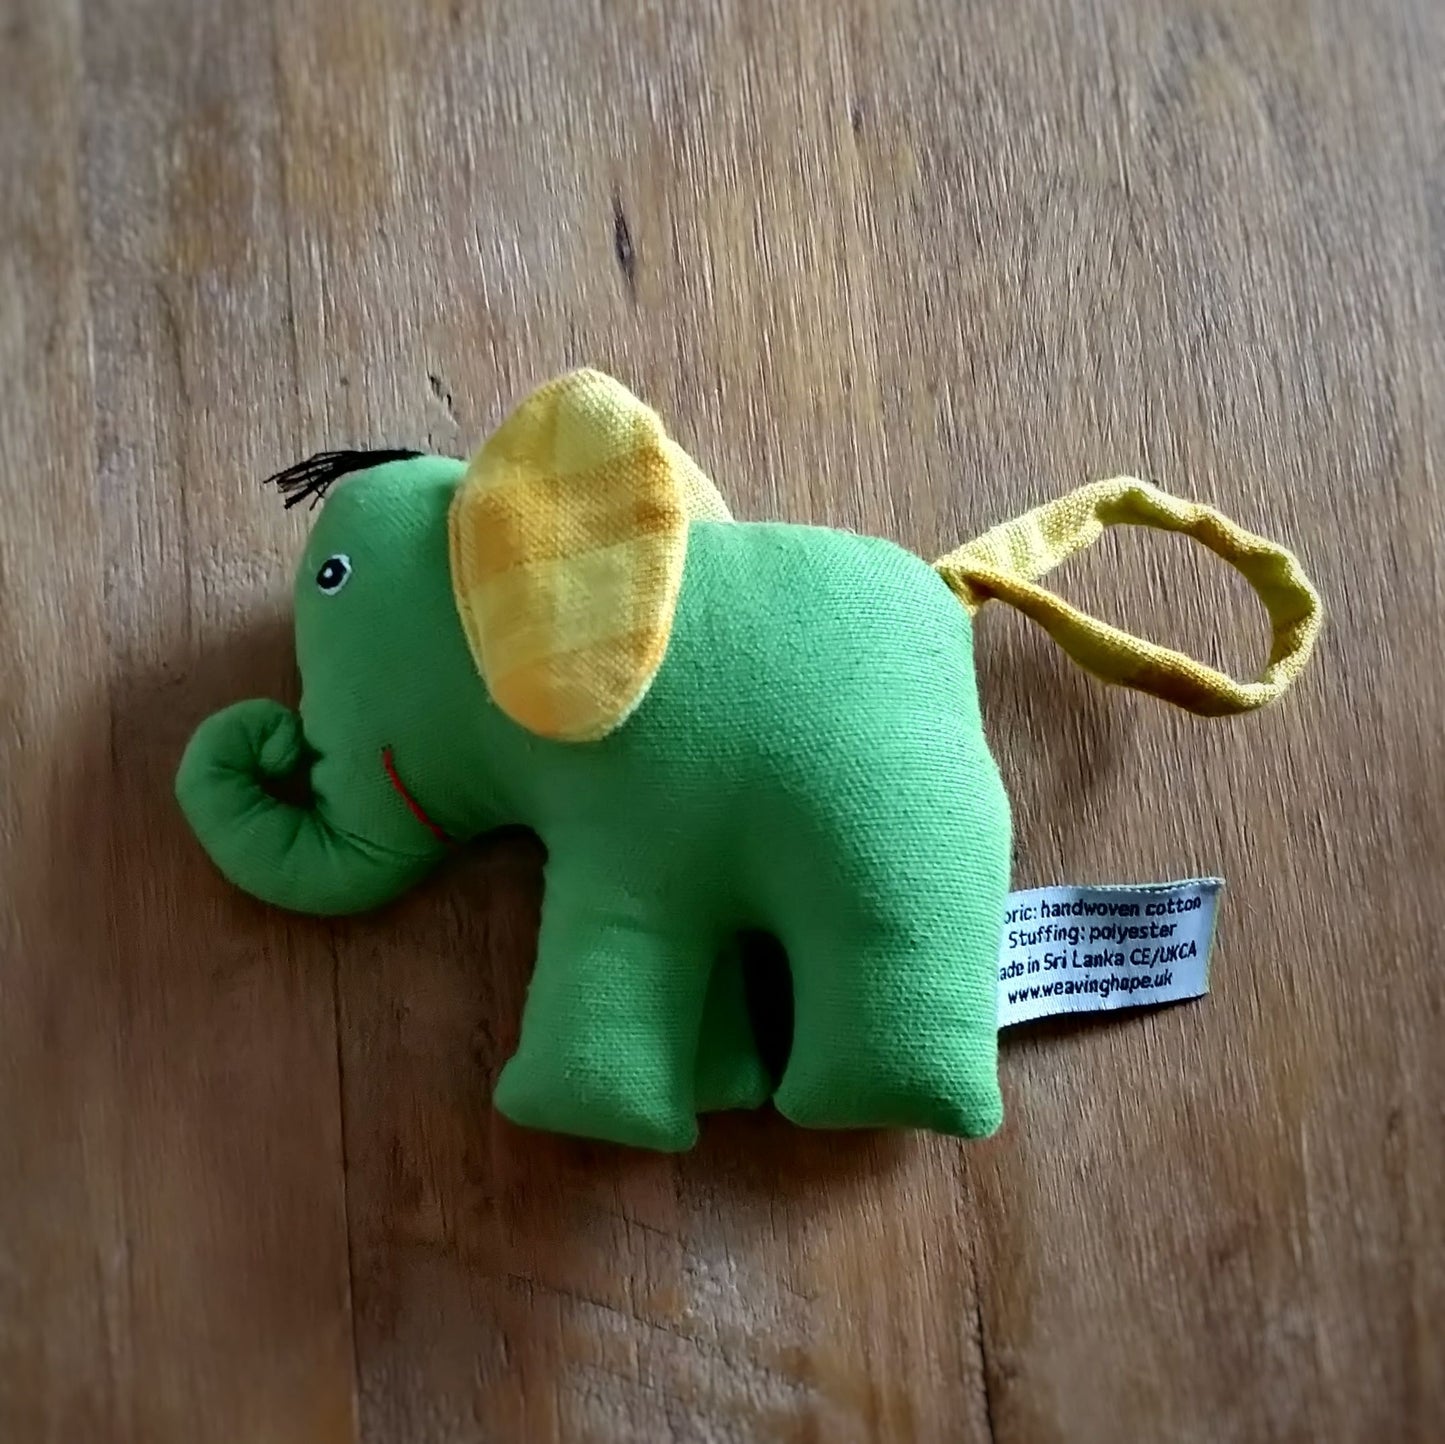 Small Elephant Soft Toy  Fair Trade - on wooden surface